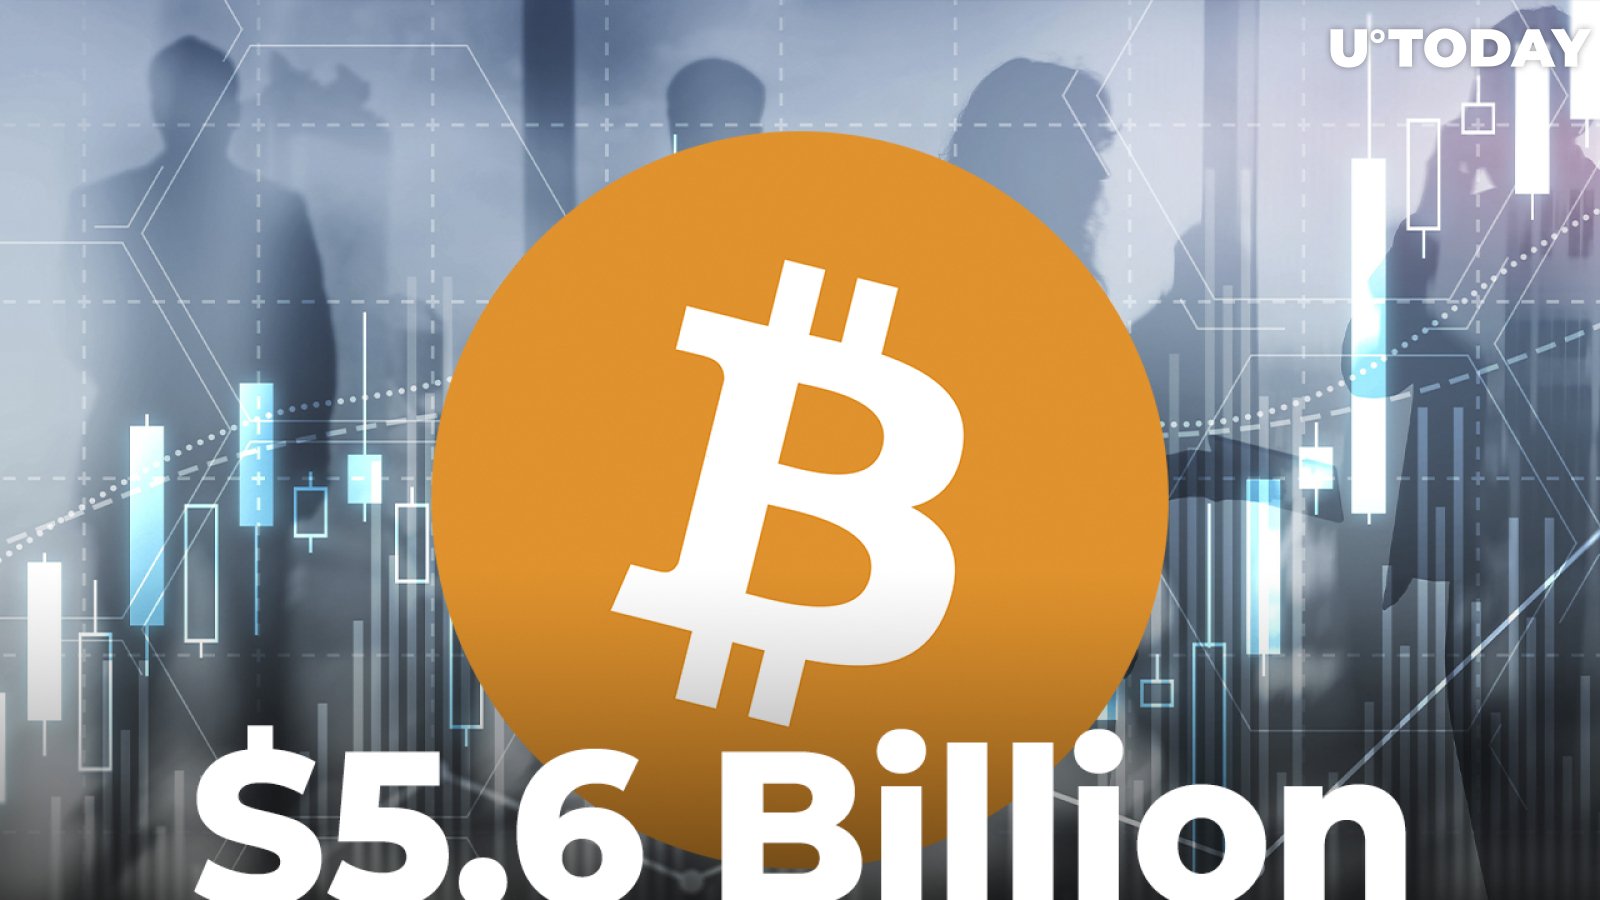 Traders Moved Record-Breaking $5.6 Billion Worth of BTC on Exchanges Amid Market Turmoil